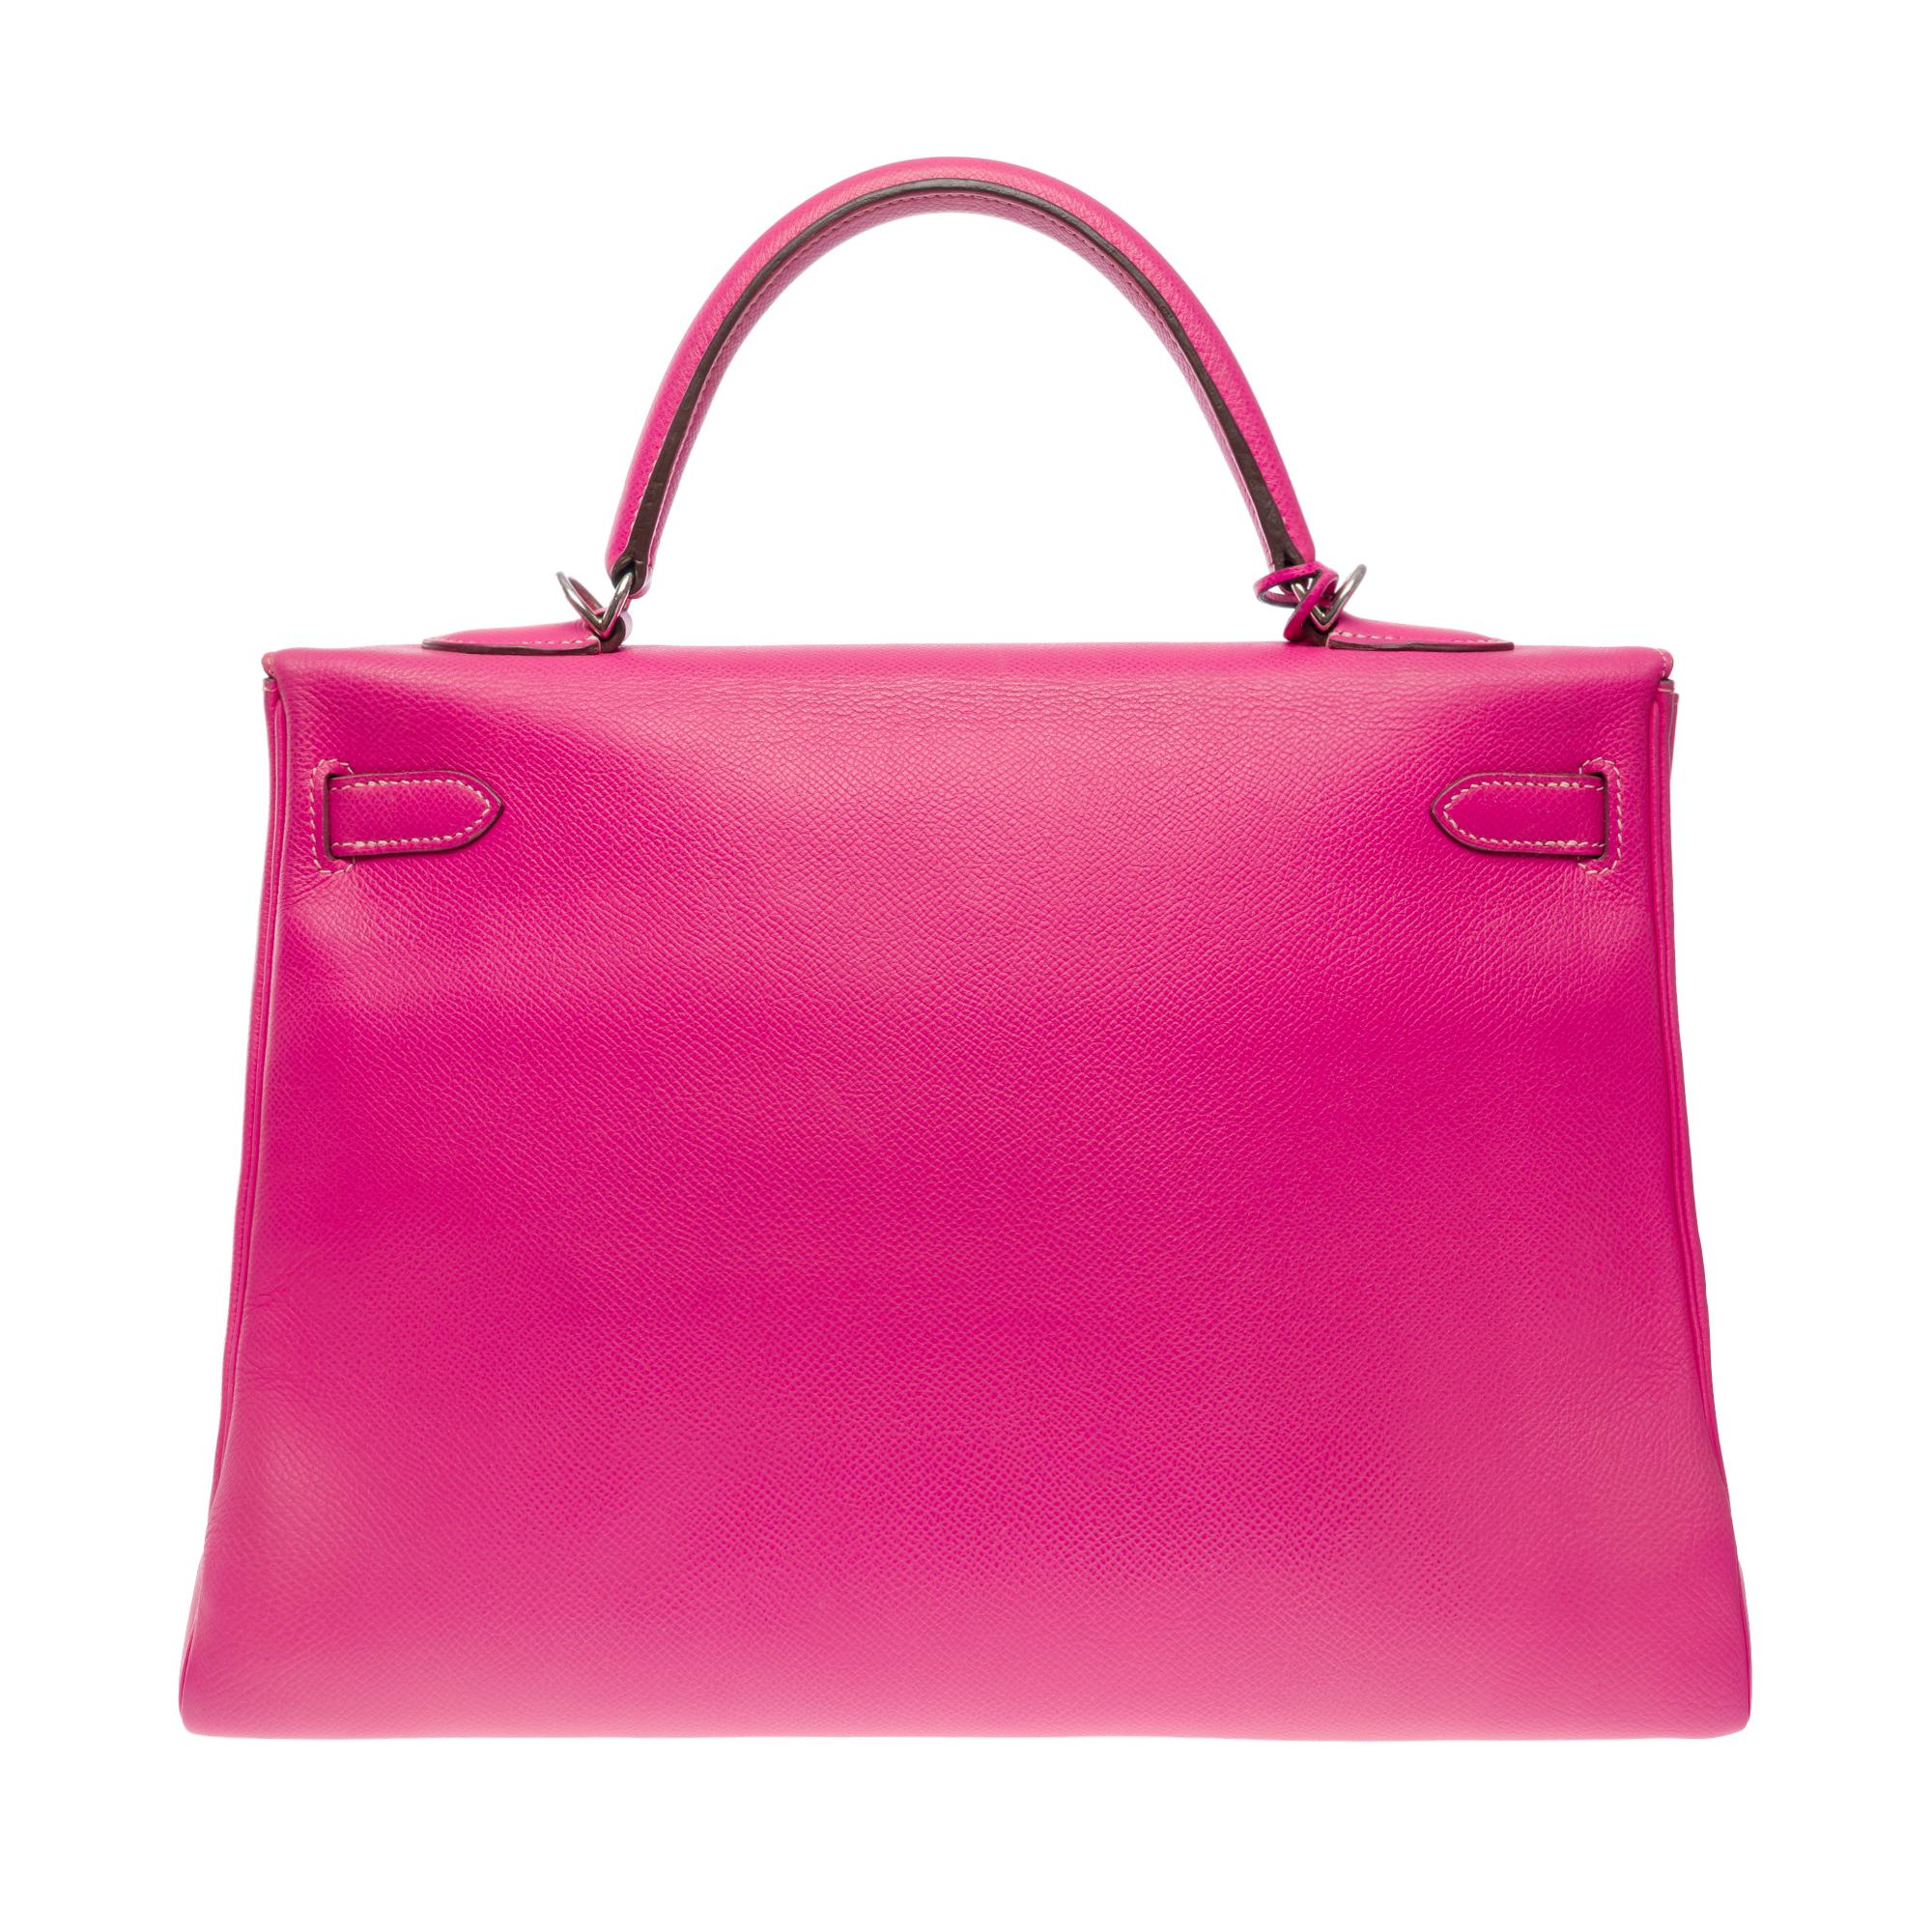 Magnificent & Rare Hermes Kelly 35 retourne from the Candy limited edition Collection in Rose Tyrien Epsom leather with white stitching and Ruby leather interior, palladium silver metal hardware, double pink leather handle for hand or shoulder